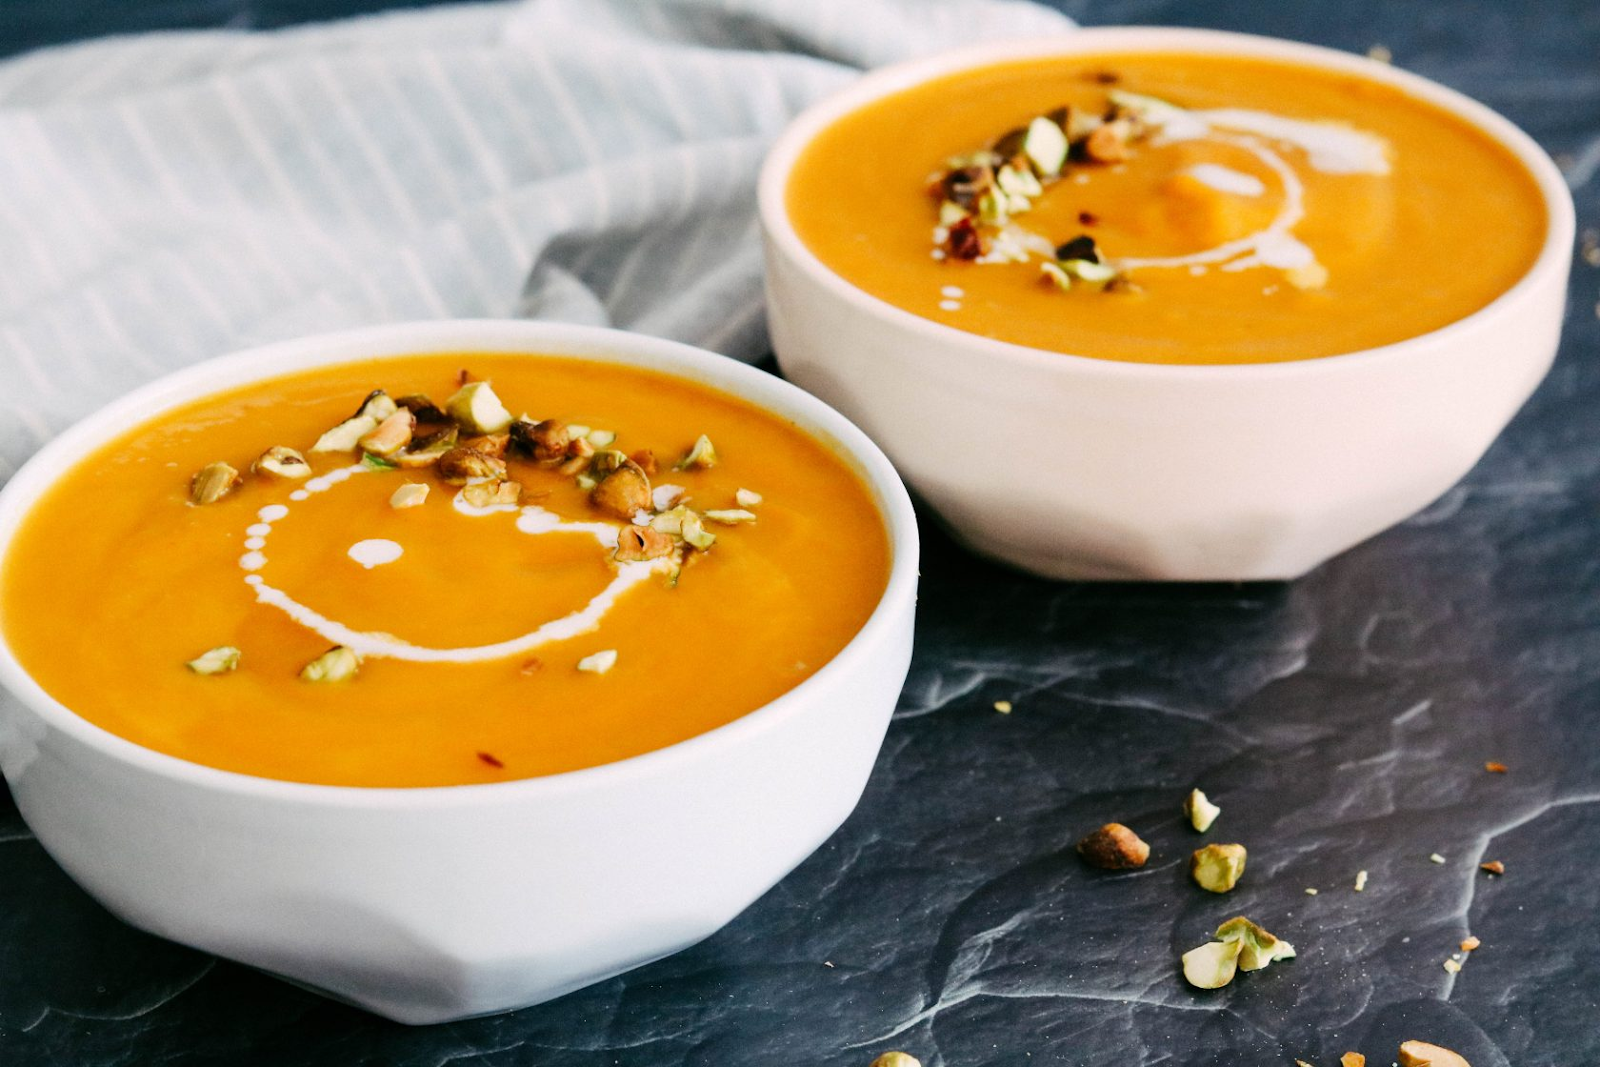 10 Slow Cooker Soup Recipes for a Hectic Lifestyle: Sweet potato